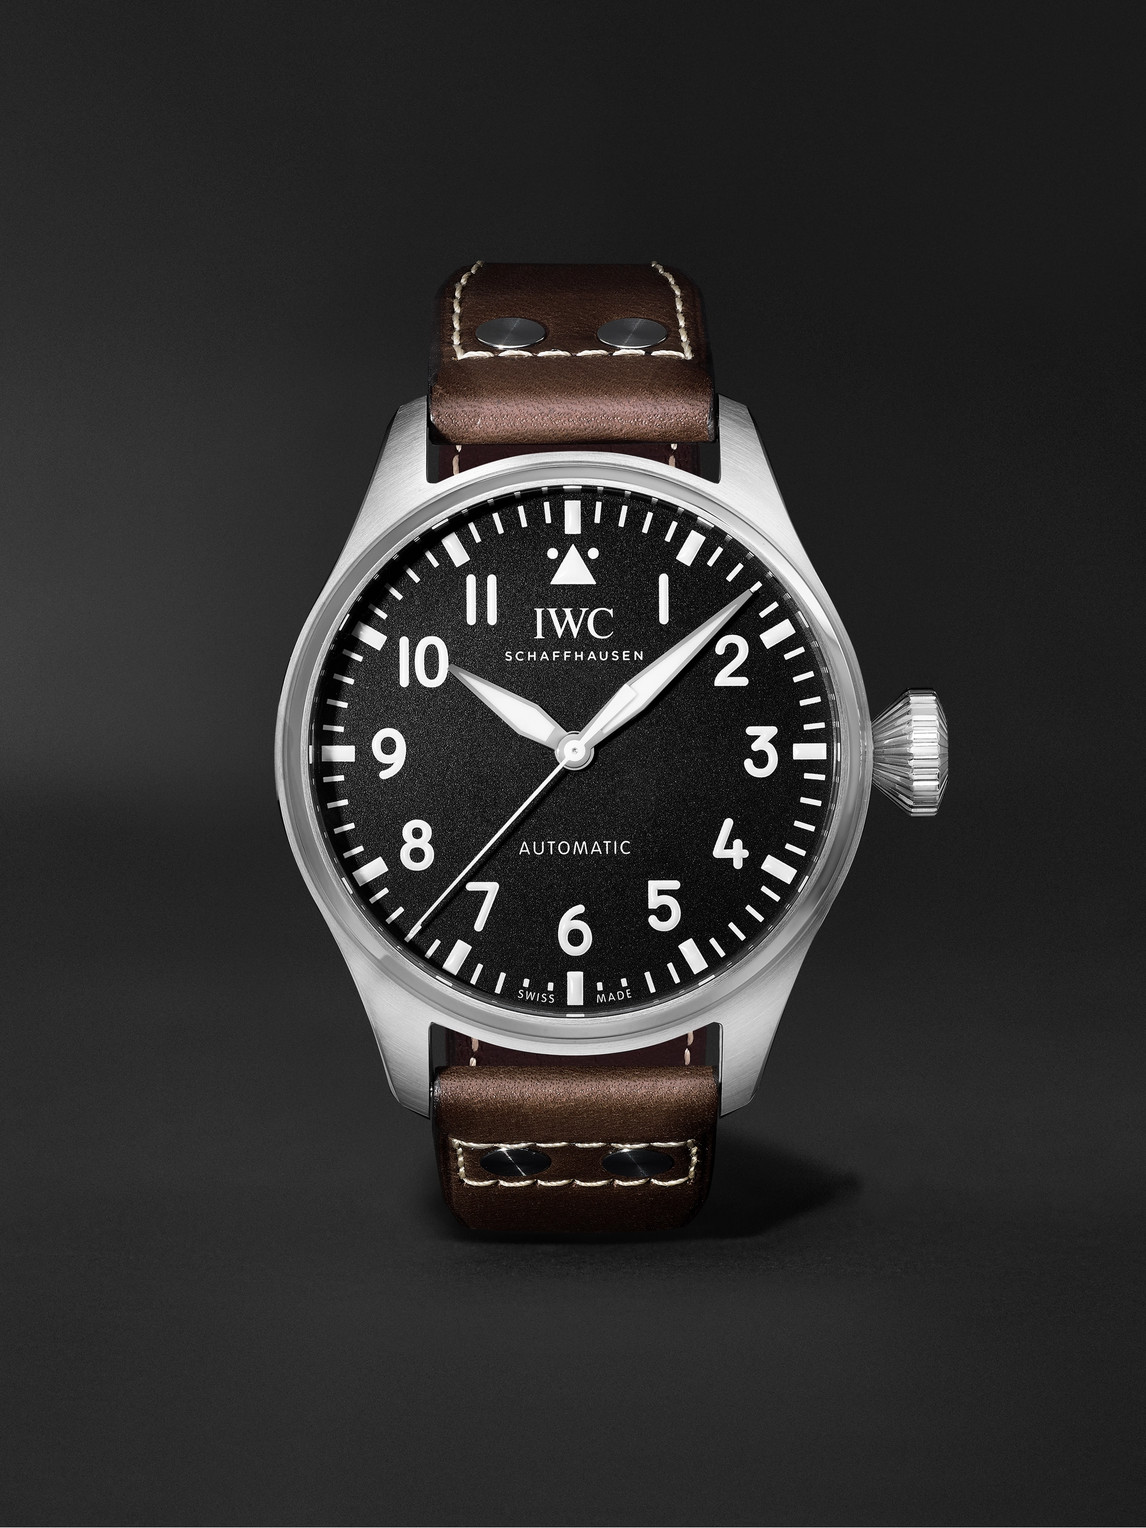 Iwc Schaffhausen Big Pilot's Automatic 43mm Stainless Steel And Leather Watch, Ref. No. Iw329301 In Unknown